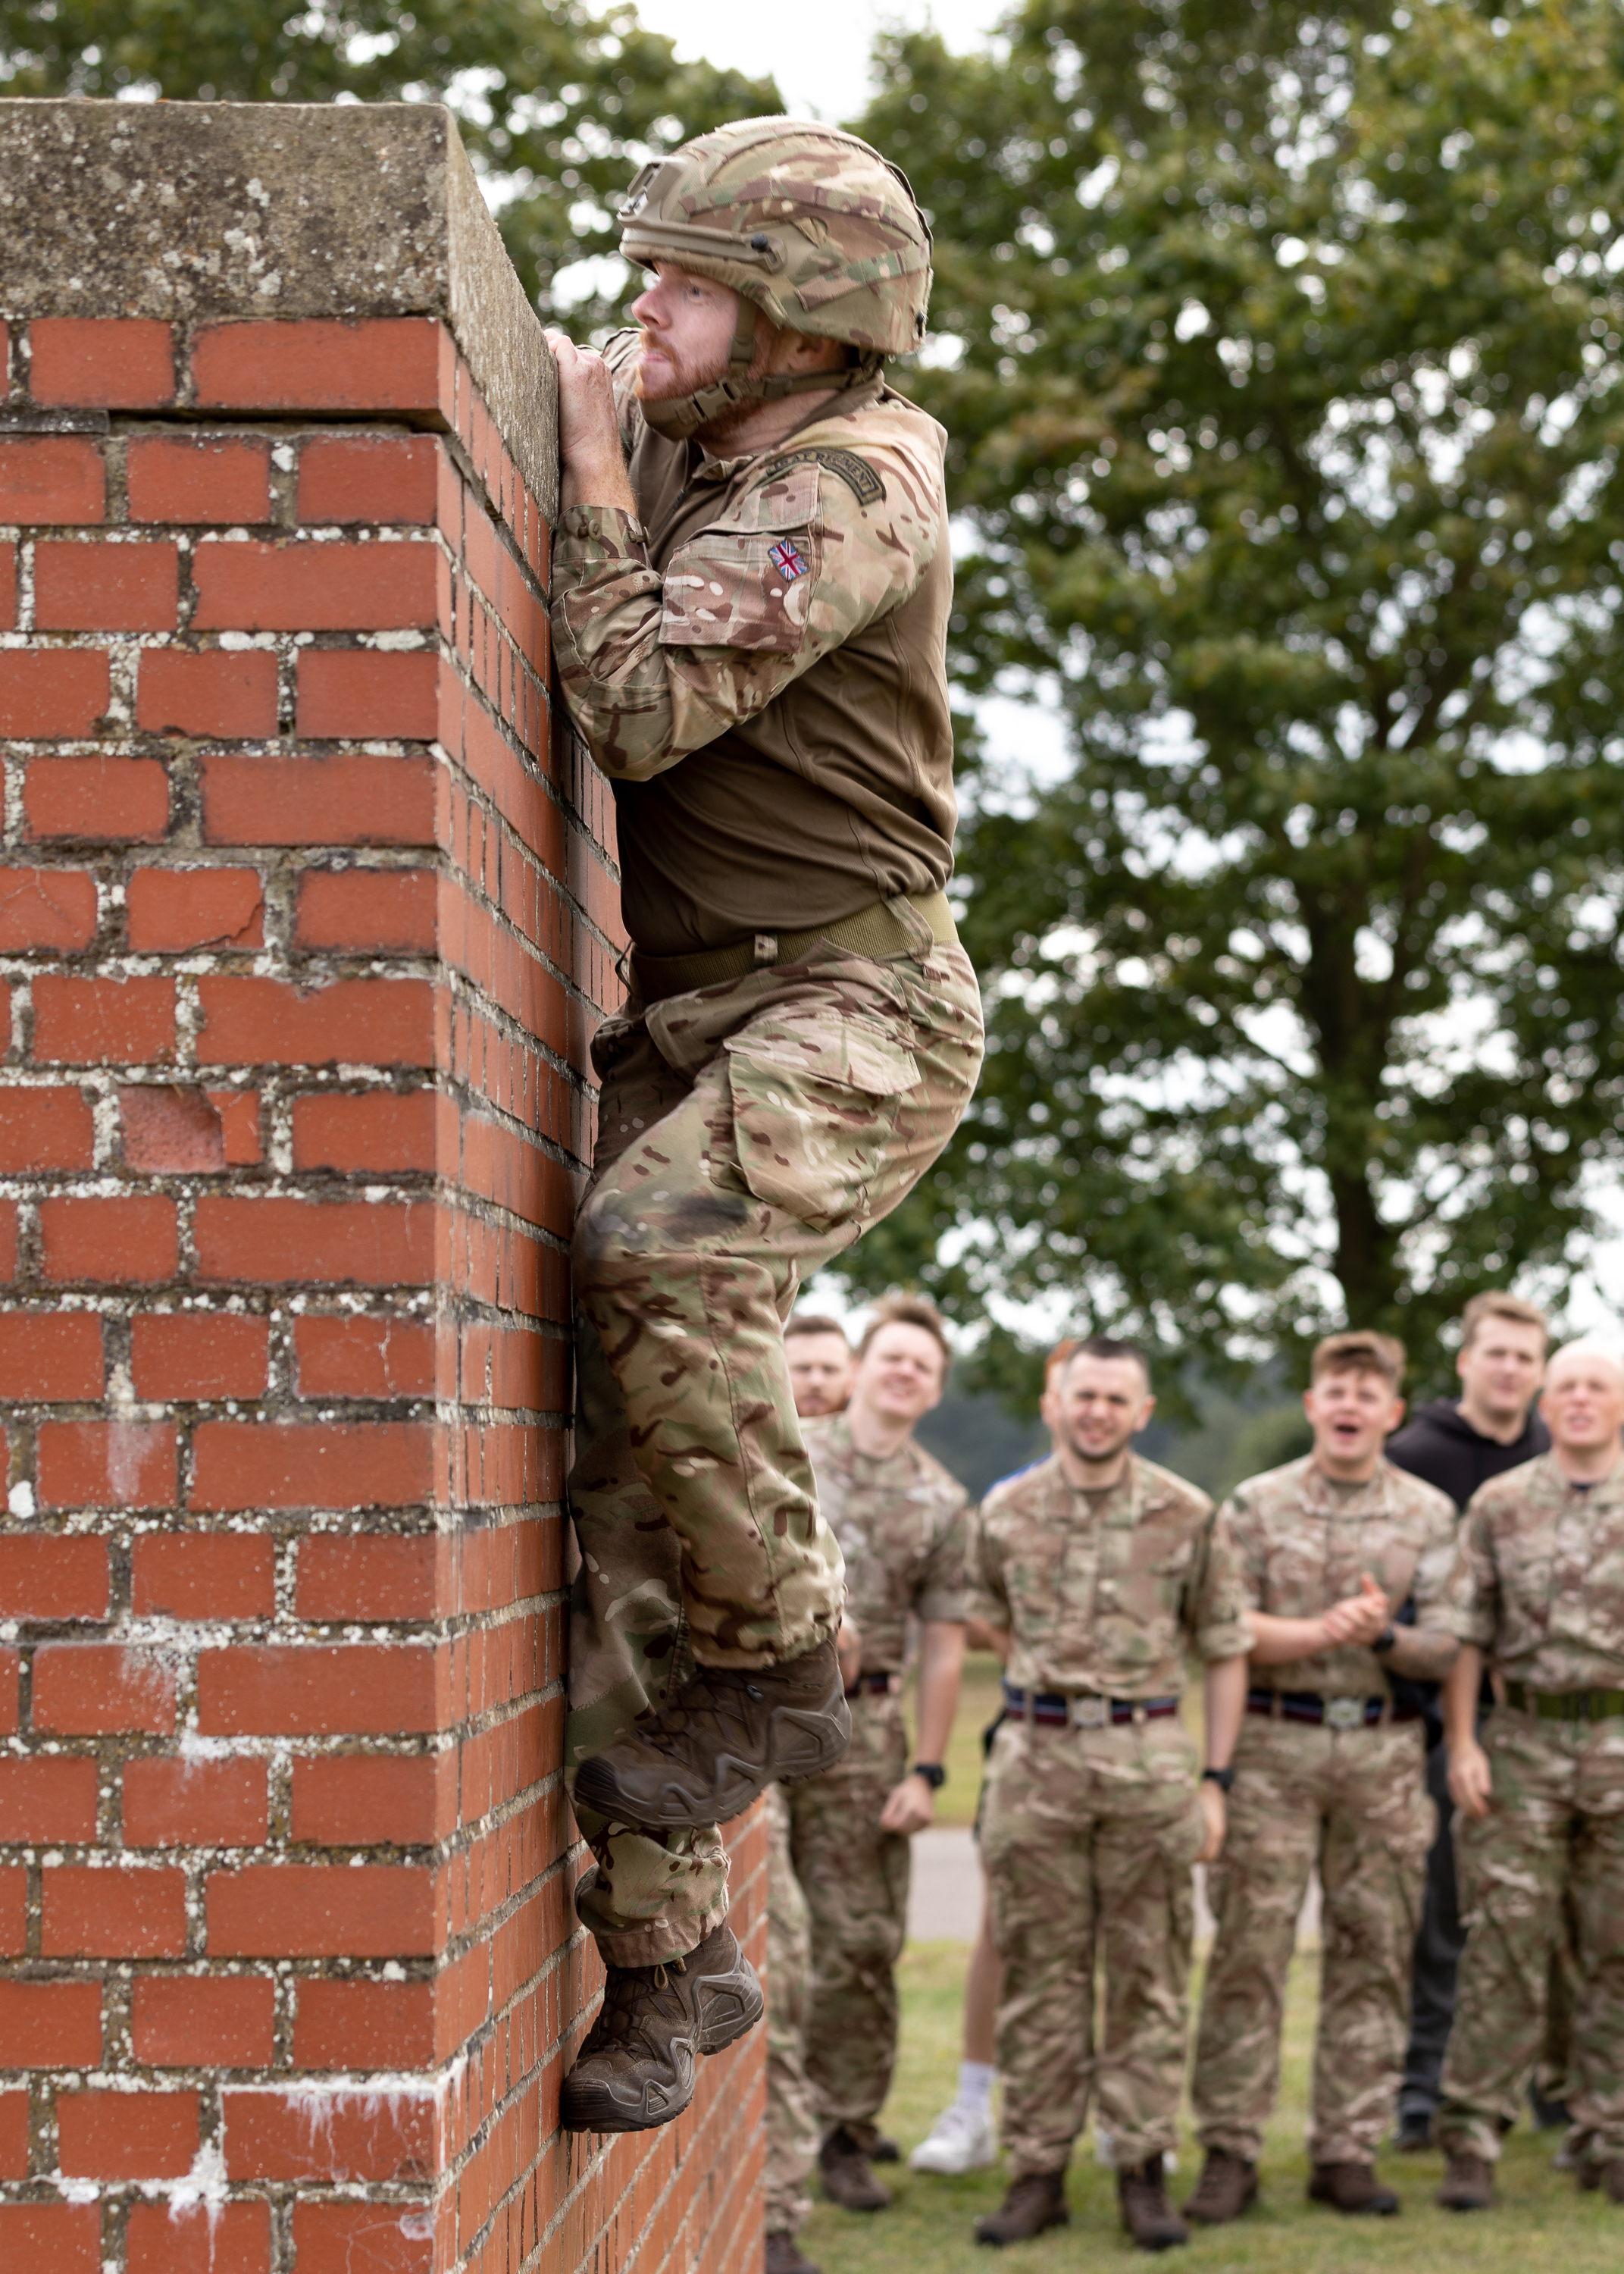 Personnel climbing a brick wall while Squadron cheers on.